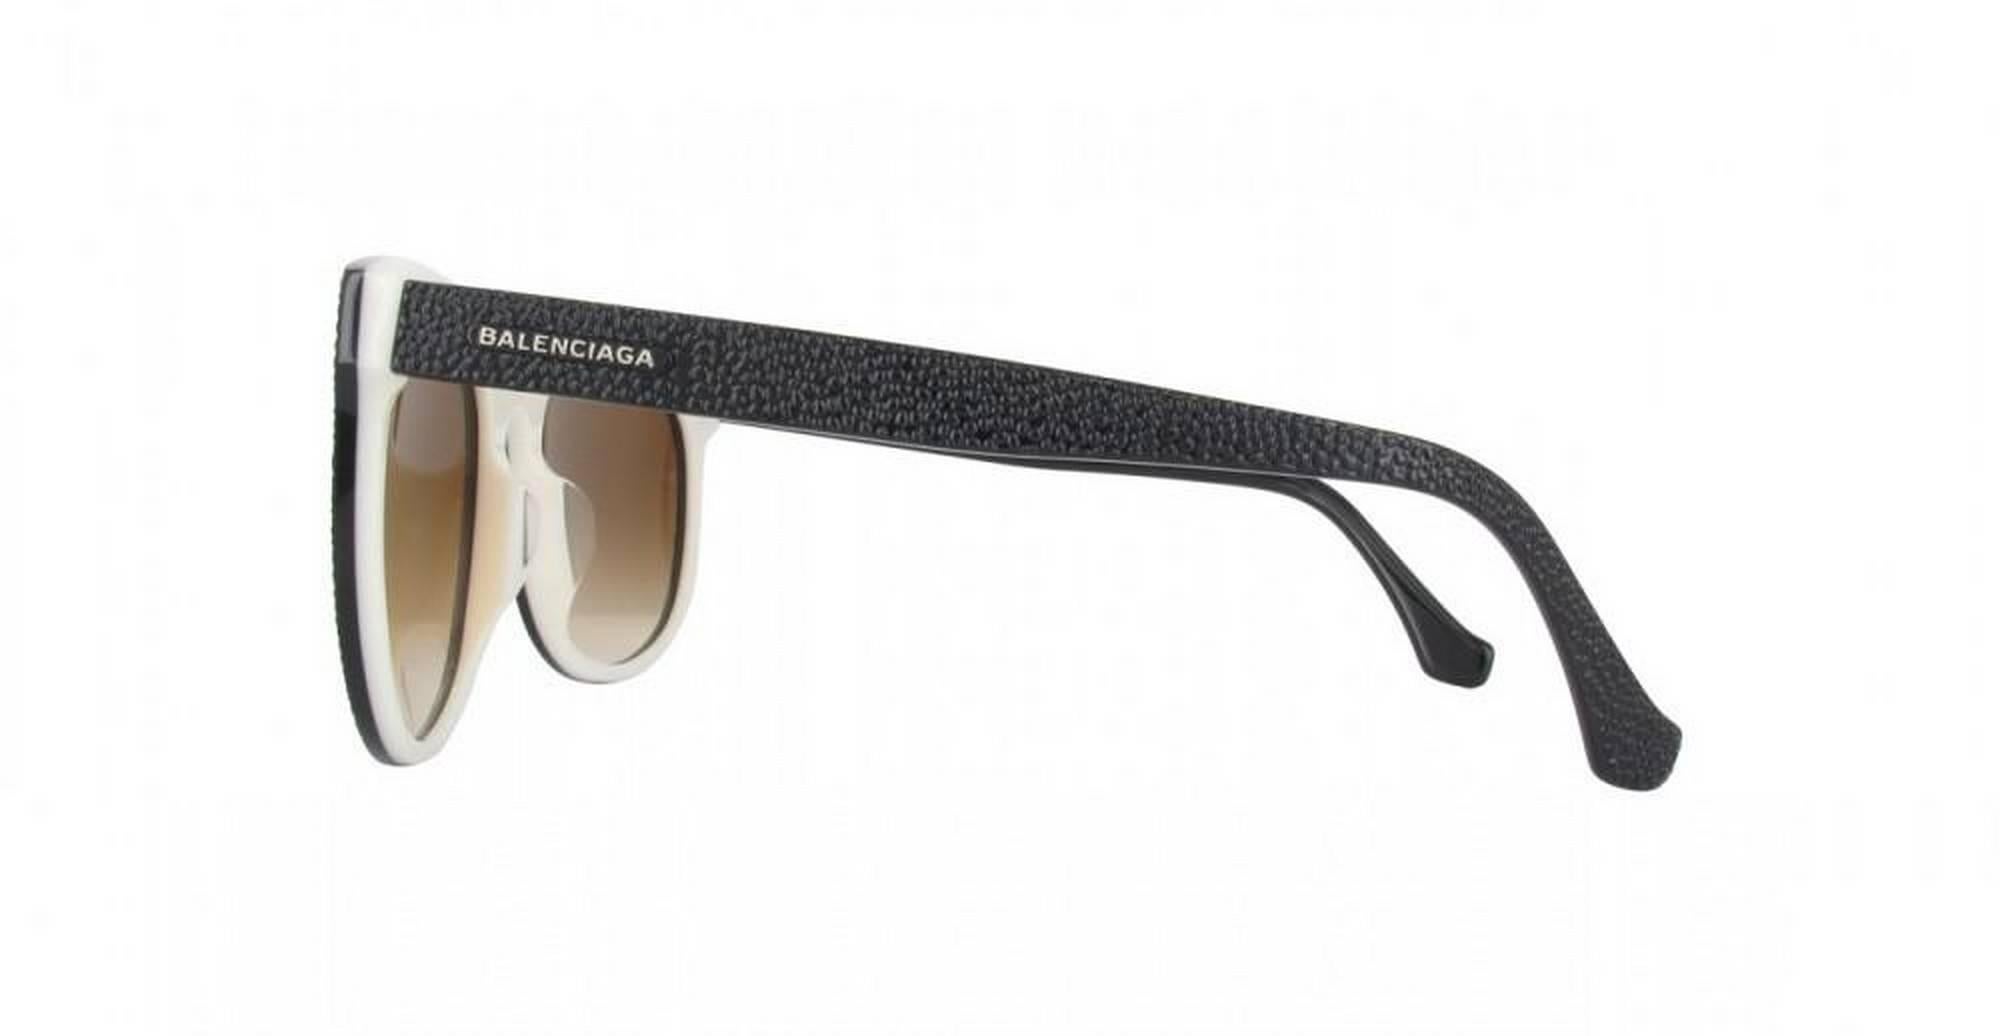 Balenciaga BA0024F-04F-57 Black / White / Gradient Brown Sunglasses

Frame : Acetate
Brand new with original case and cleaning cloth.
Made in Italy